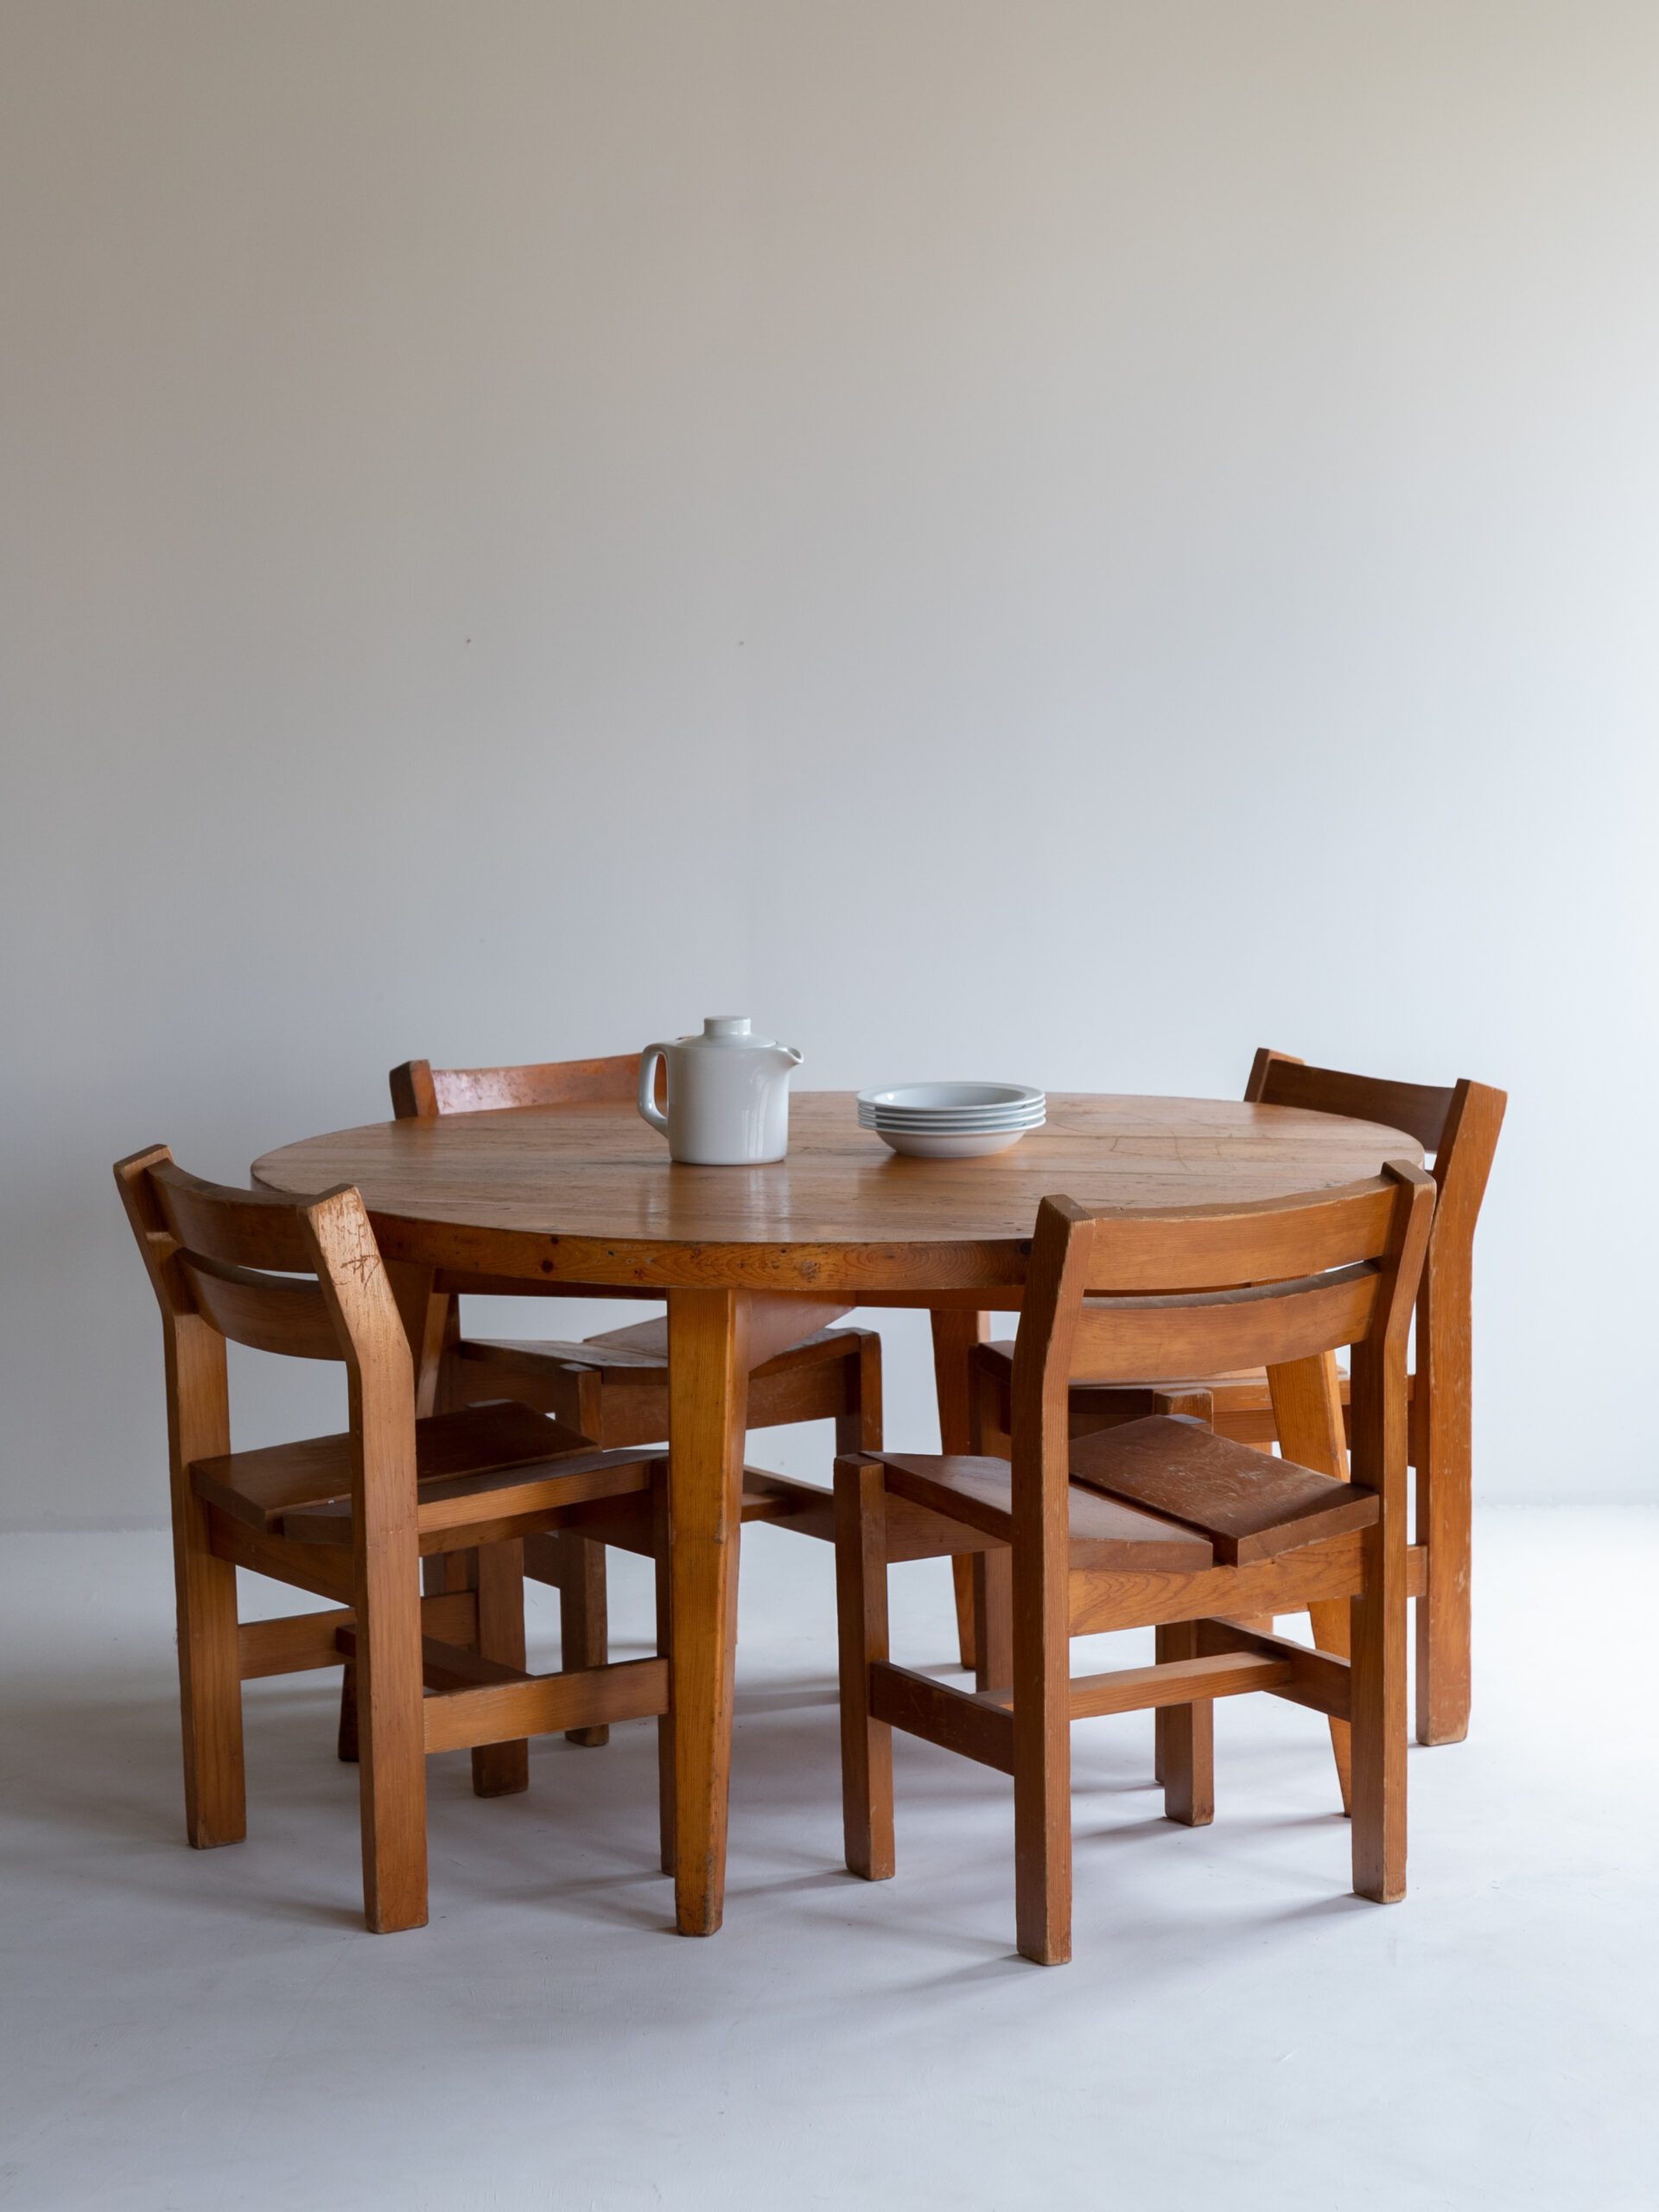 Vintage round table by Christian Durupt and Charlotte Perriand, 1968